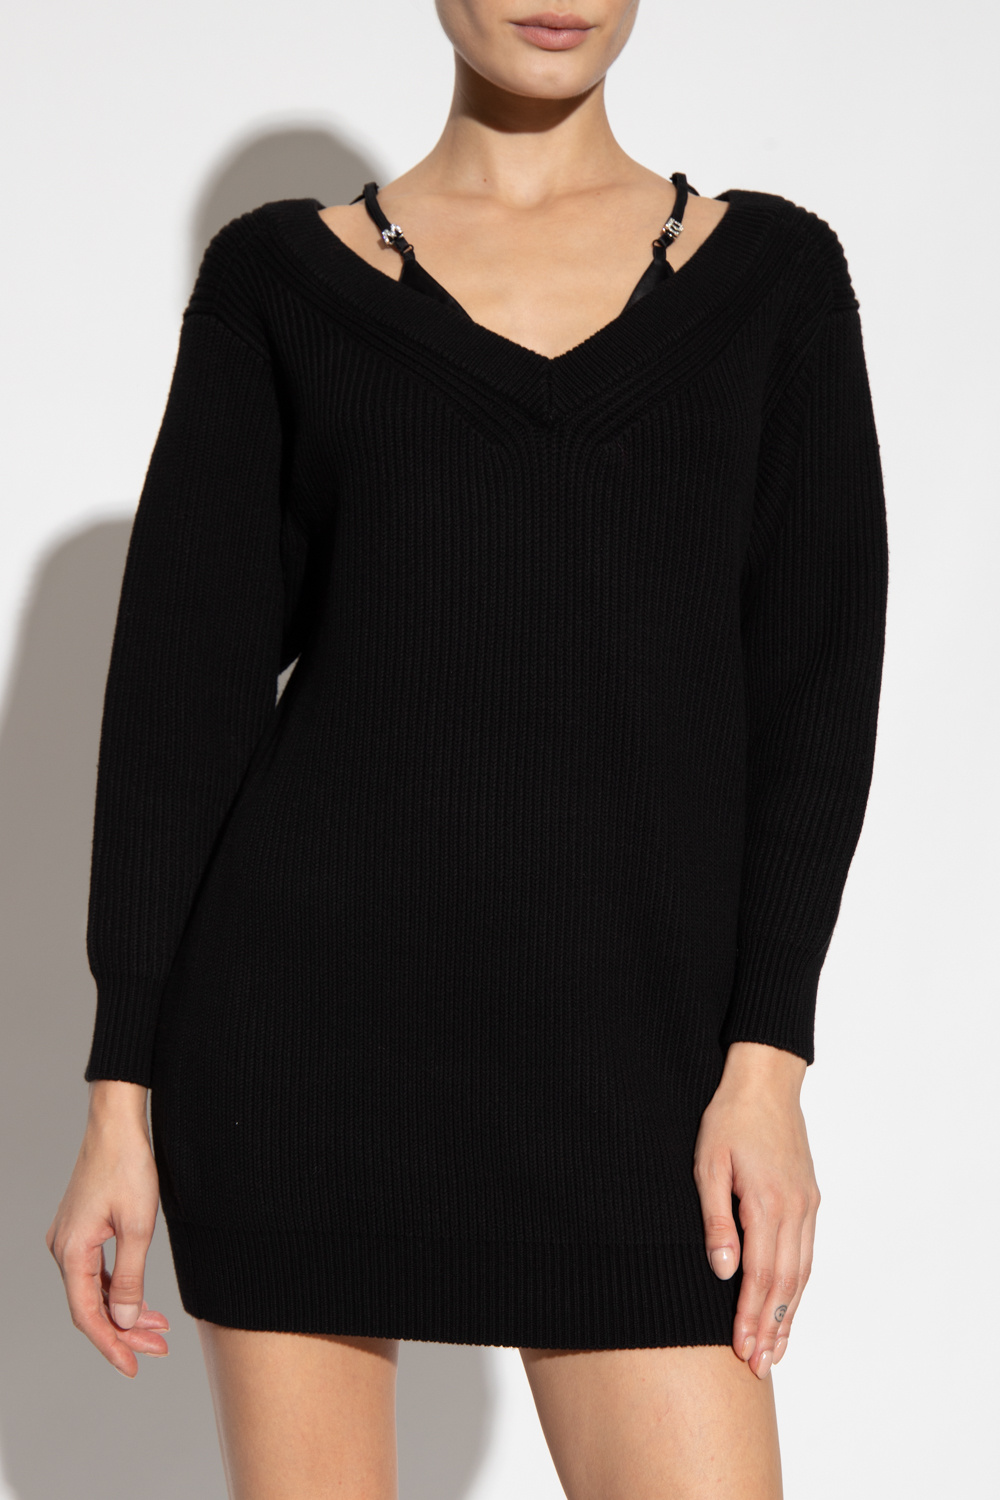 T by Alexander Wang Off-the shoulder dress